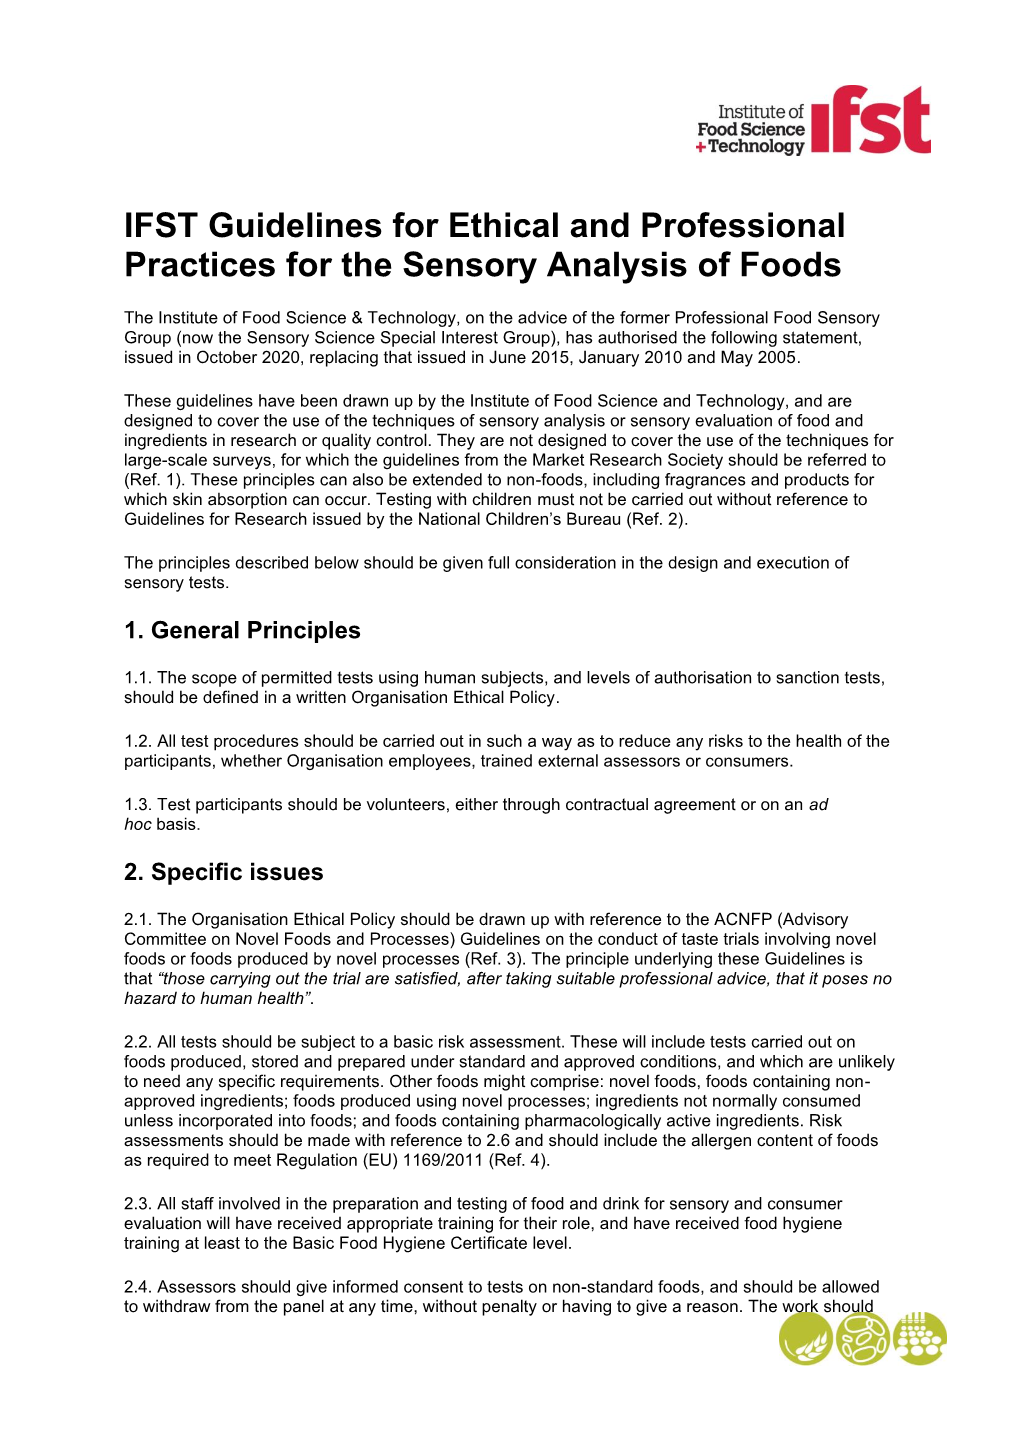 IFST Guidelines for Ethical and Professional Practices for the Sensory Analysis of Foods